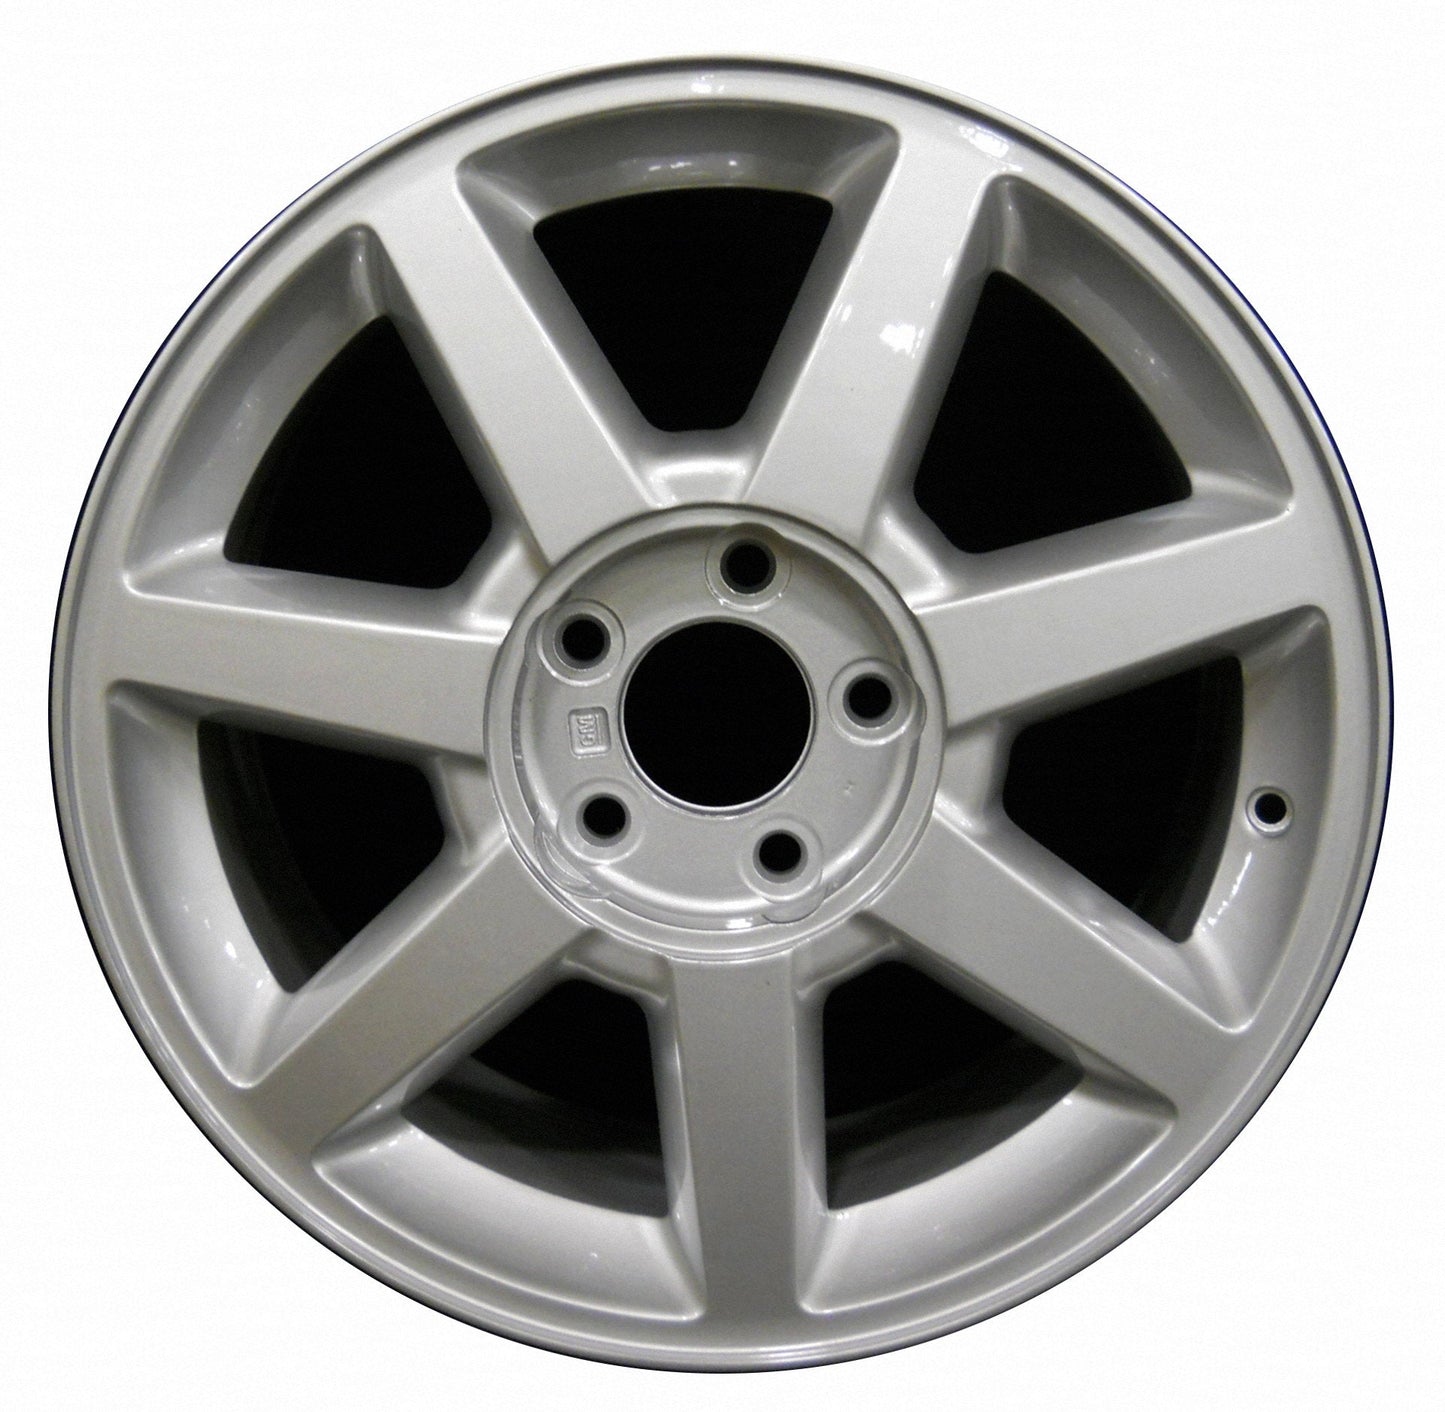 Cadillac CTS  2004, 2005, 2006, 2007, 2008, 2009 Factory OEM Car Wheel Size 17x7.5 Alloy WAO.4578FT.LS01.FF